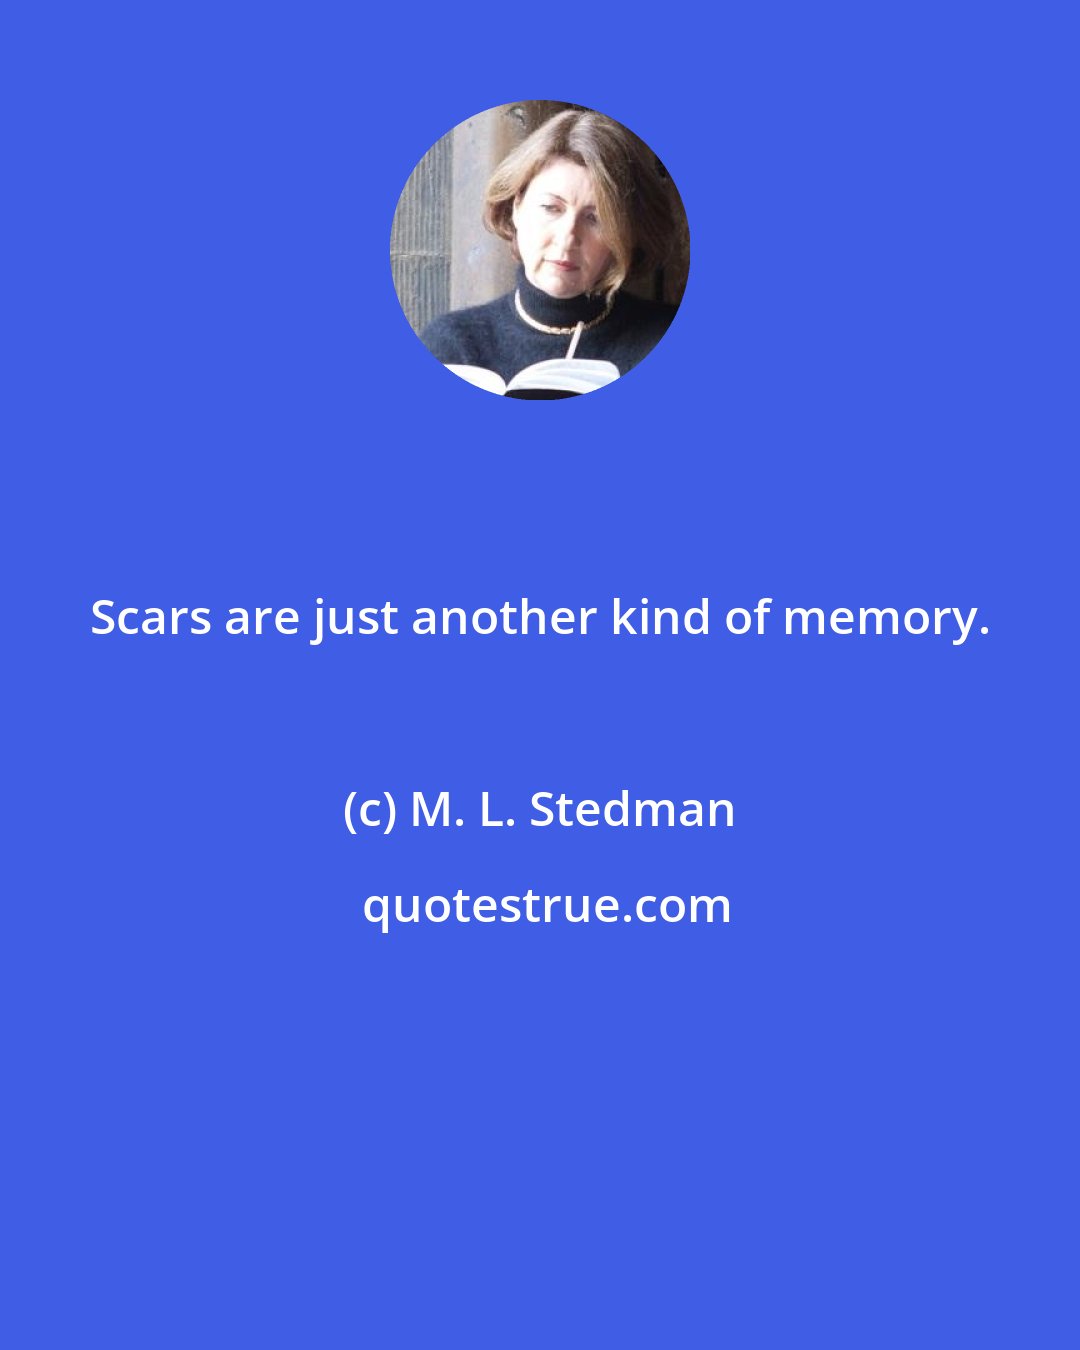 M. L. Stedman: Scars are just another kind of memory.